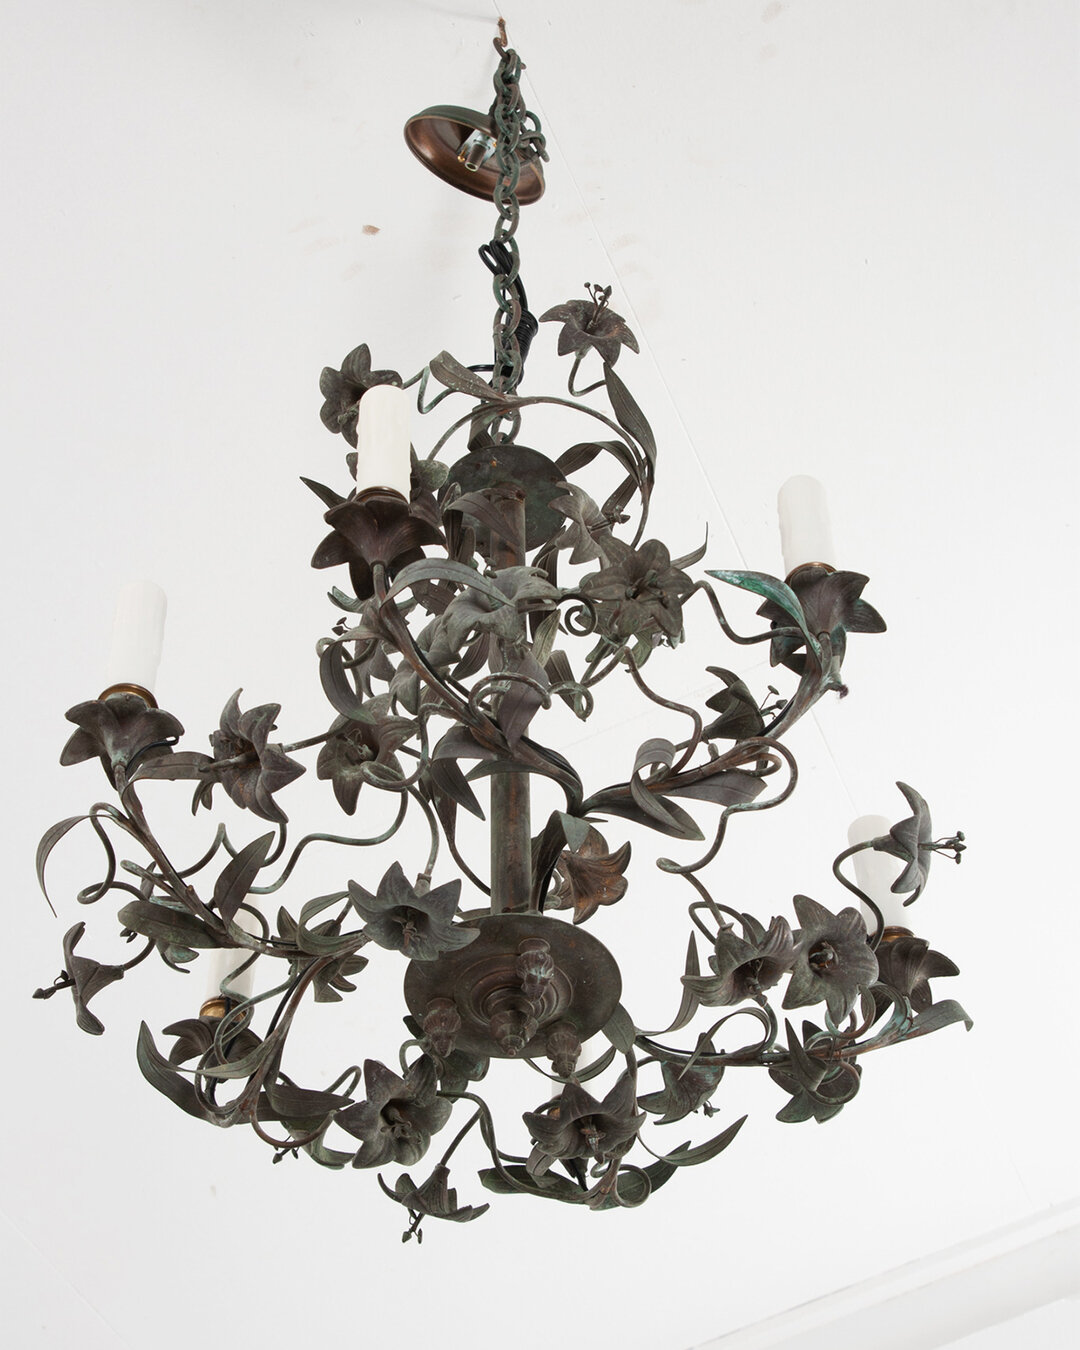 A stunning six light French 19th Century Floral Cathedral Chandelier. Shaped in the likeness of intertwining lilies- fantastically detailed metalwork and oxidation give this light fixture so much character. View the detailed images to get a closer lo